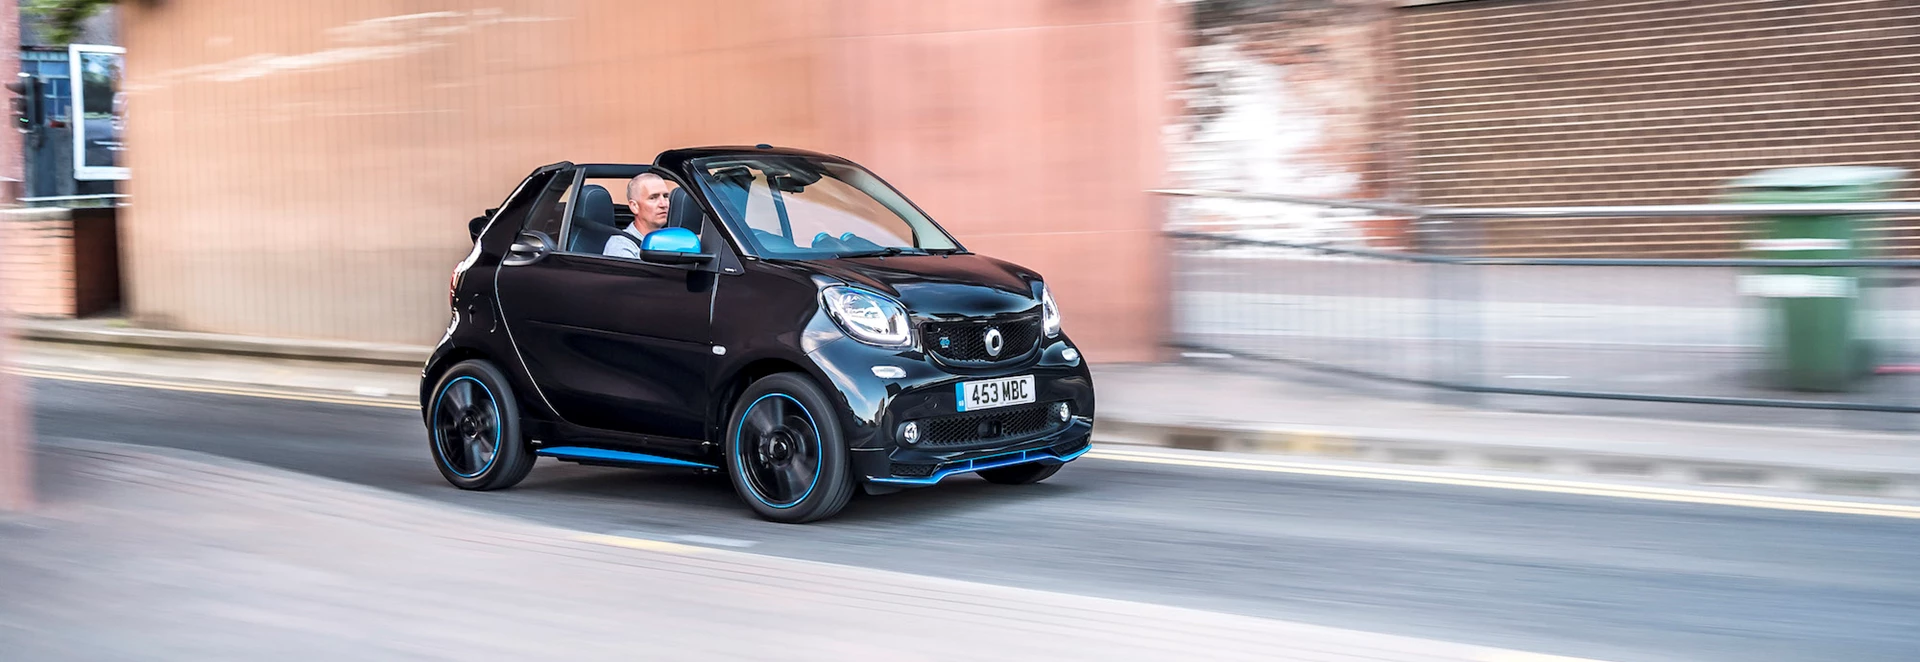 2018 Smart Fortwo EQ Review